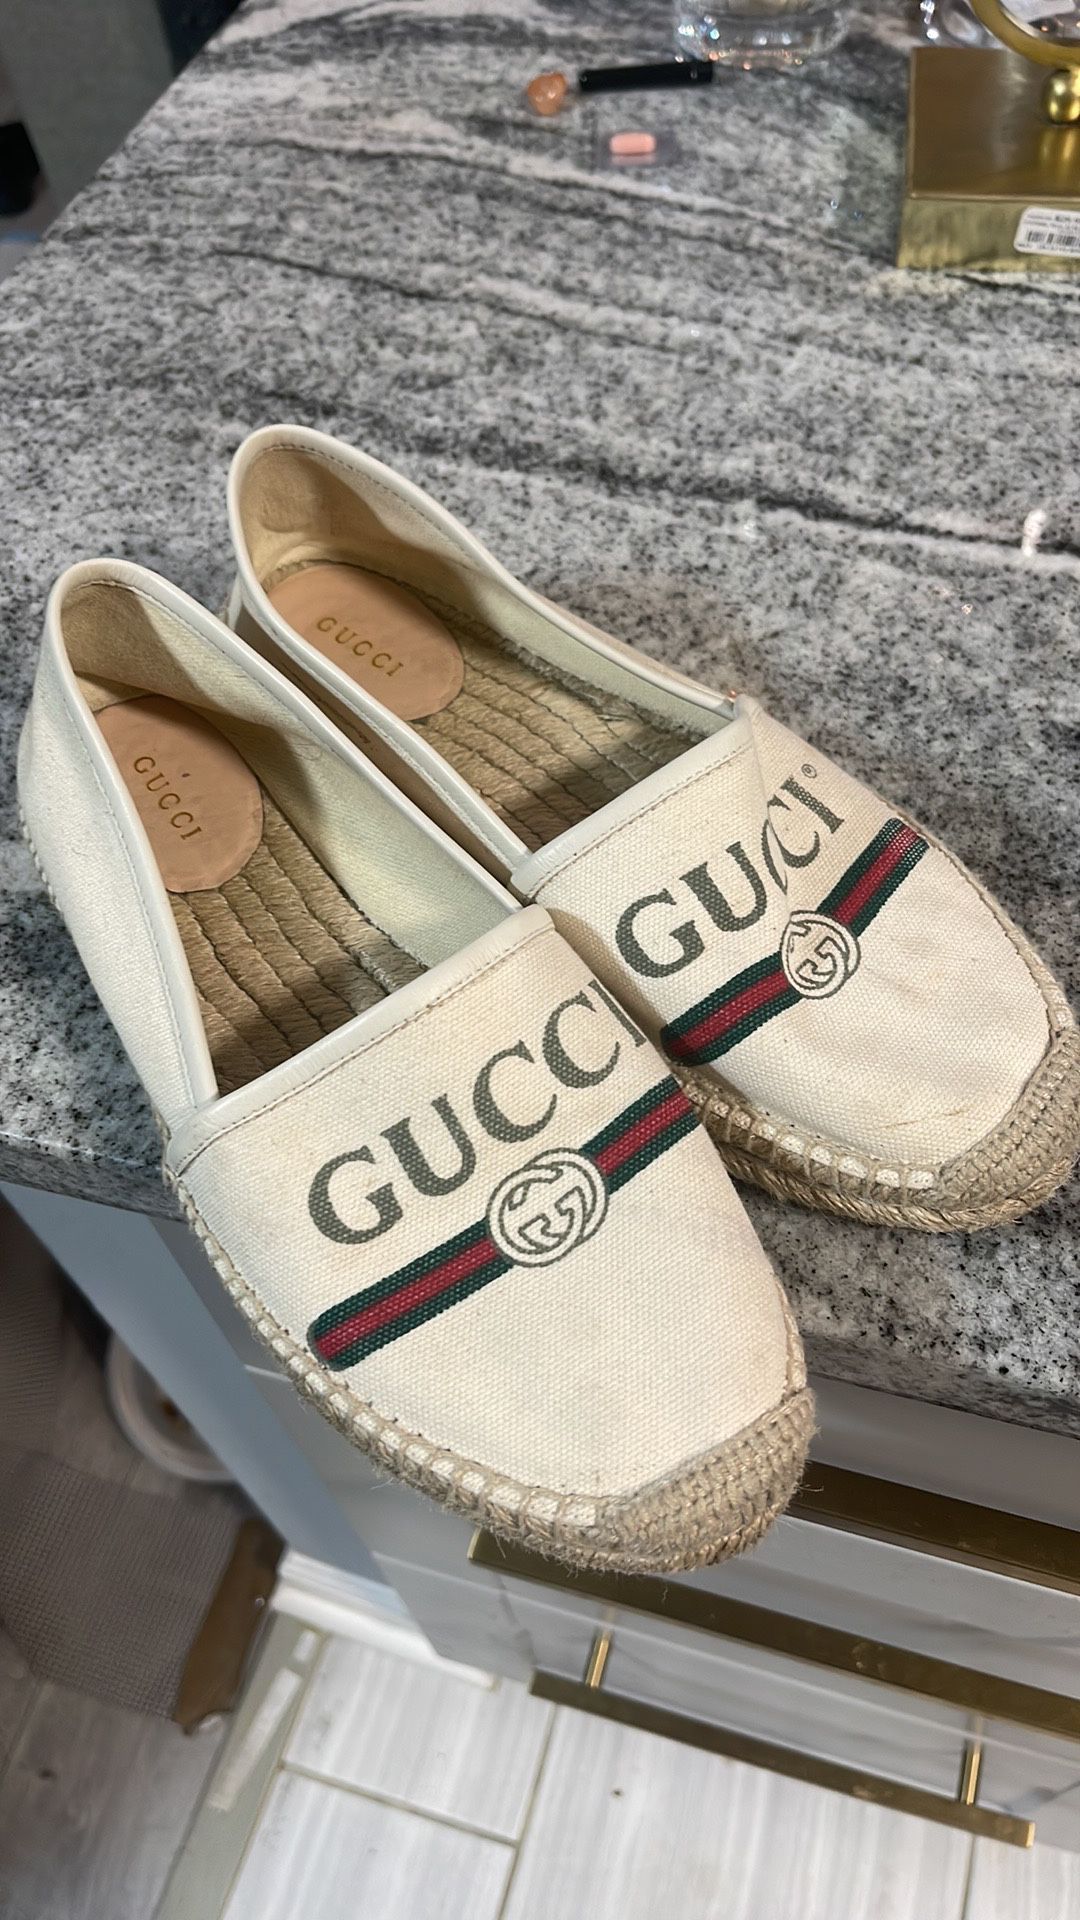 Gucci Off-white Logo Printed Canvas Leather Trimmed Espadrilles Flats 38.5 Us Size 8.5 Men